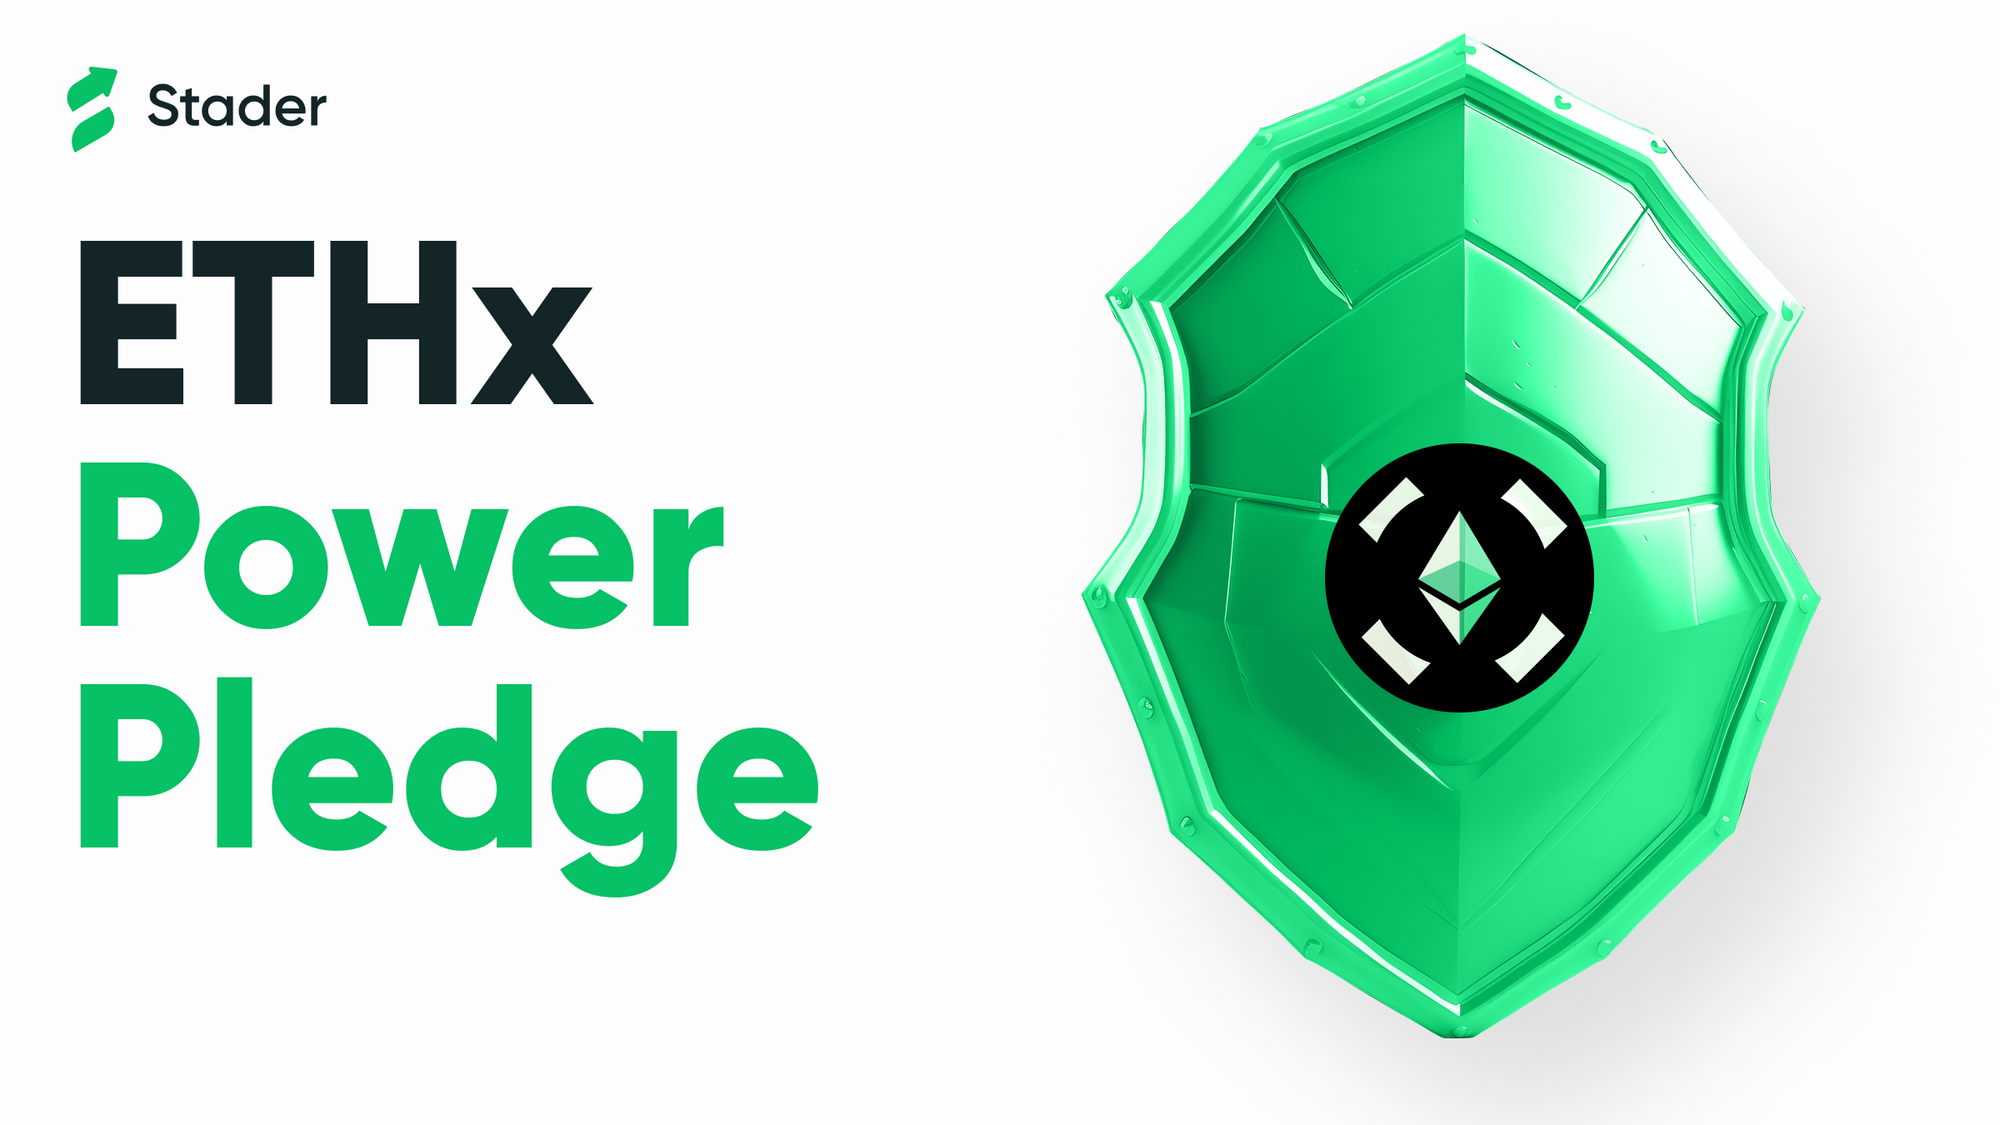 Stader’s ETHx Power Pledge: Our promise to keep Ethereum decentralized